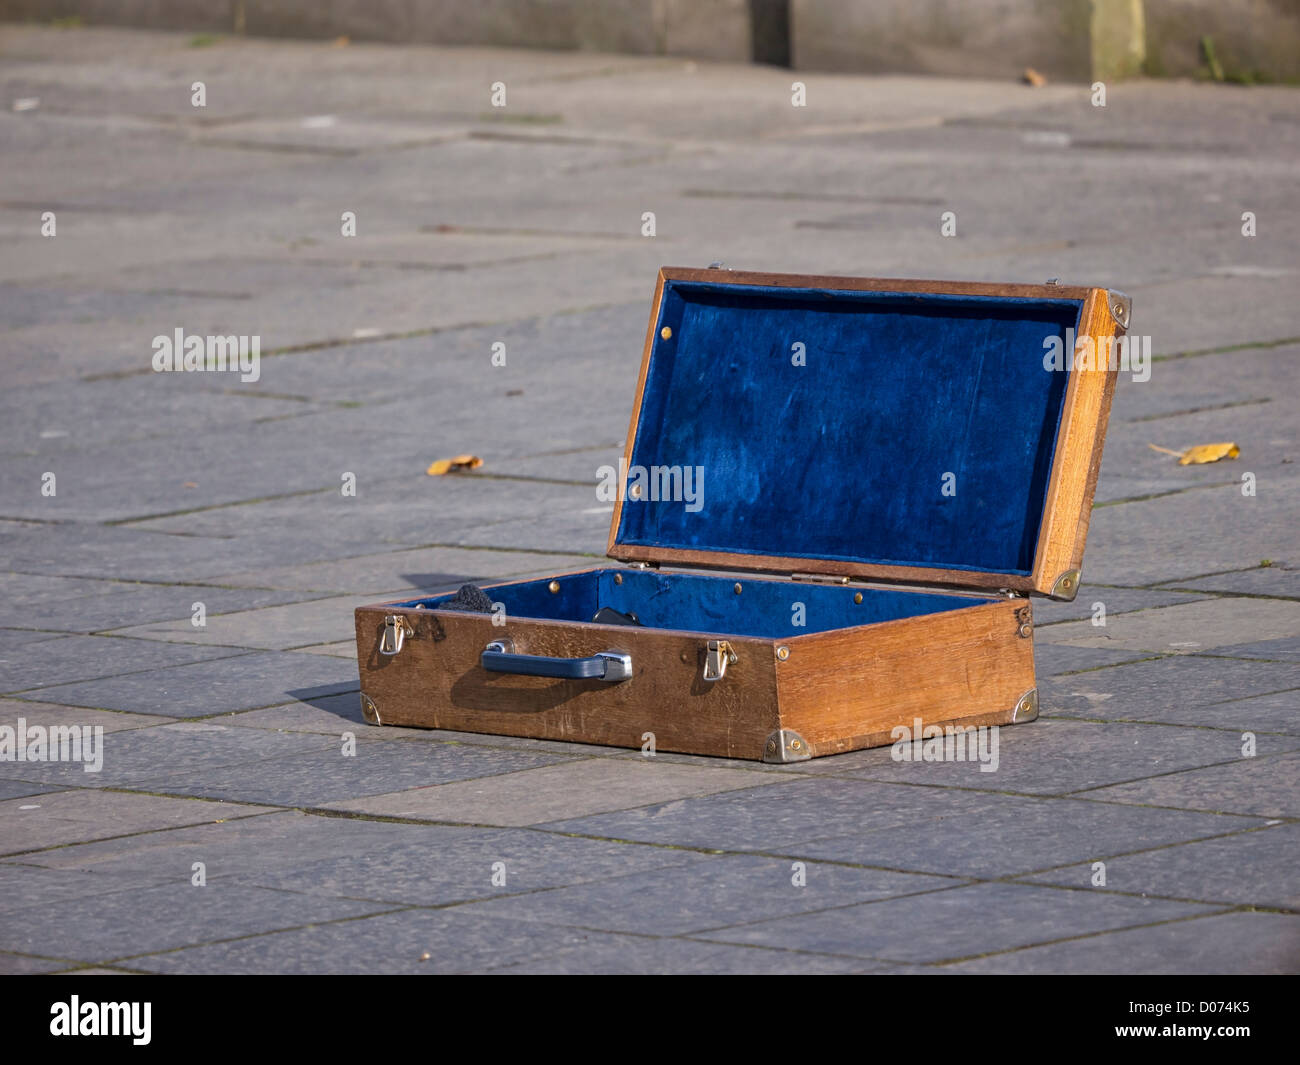 An old wooden box used by a street busker for collecting money for his performance. On the street in Edinburgh, Scotland. Stock Photo